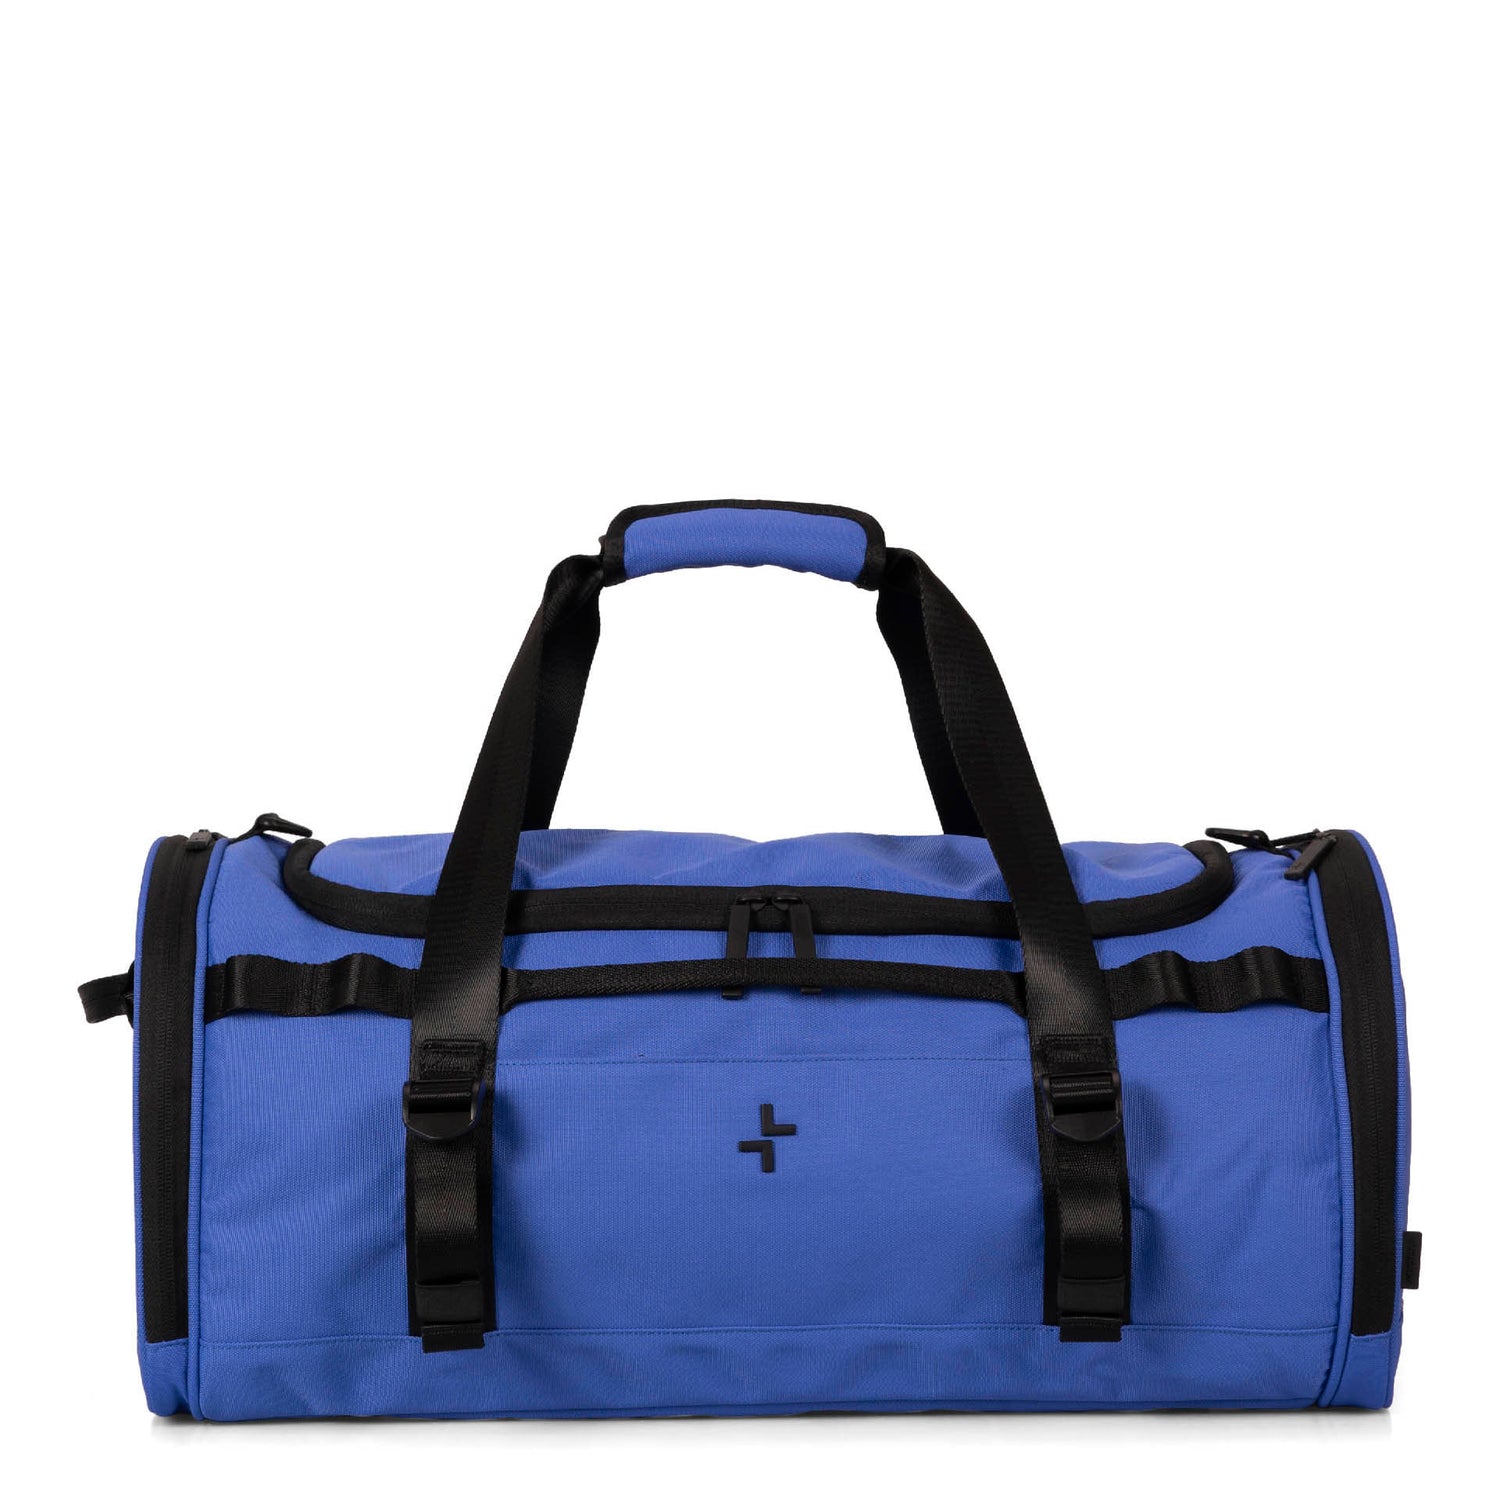 Front side of a blue duffle bag called Banff designed by Tracker showing its top handles, front tracker logo, and multiple zippers.